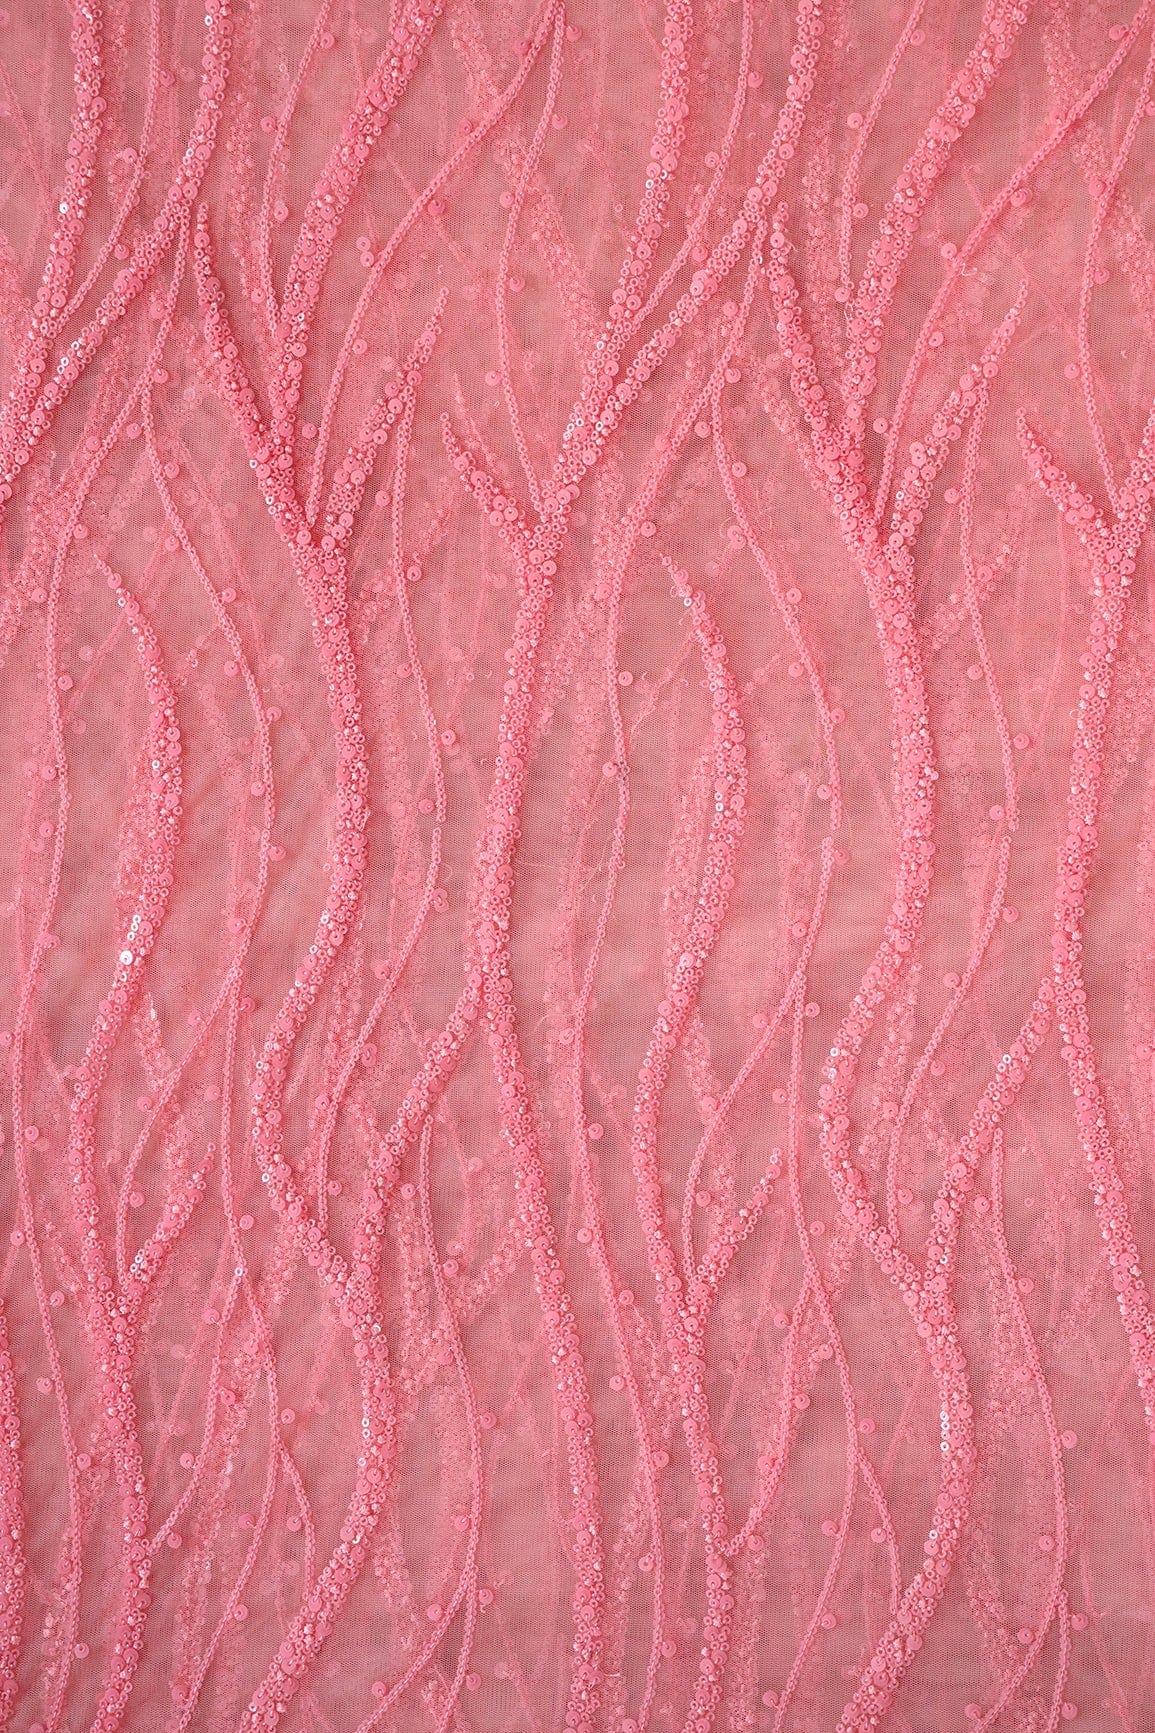 doeraa Embroidery Fabrics Beautiful Sequins With Pink Thread Wavy Embroidery Work On Pink Soft Net Fabric